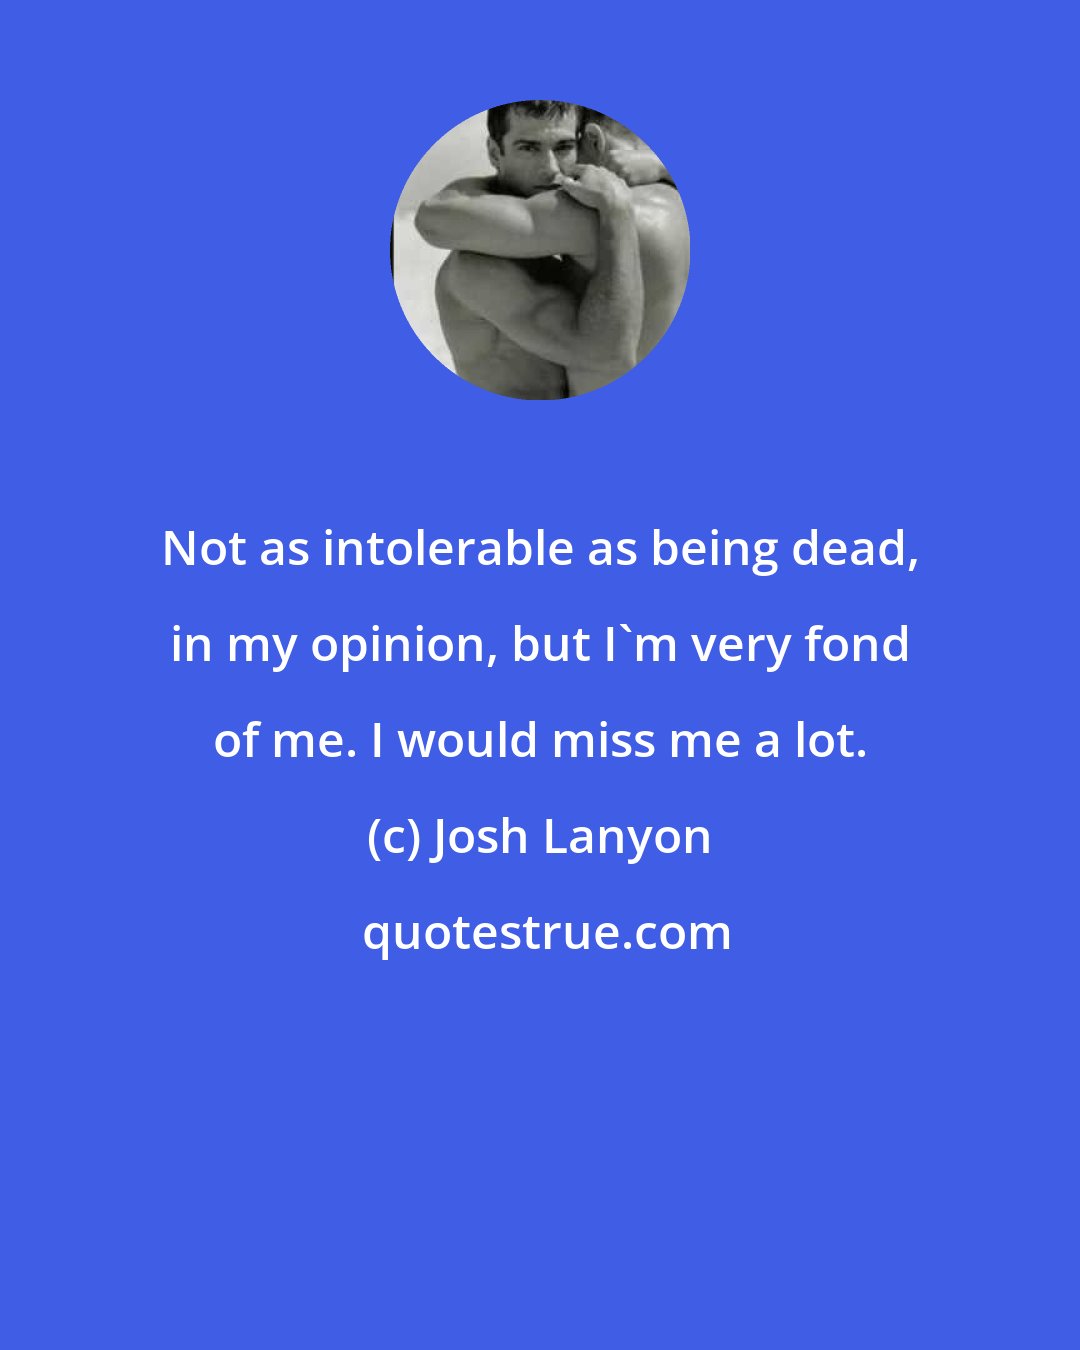 Josh Lanyon: Not as intolerable as being dead, in my opinion, but I'm very fond of me. I would miss me a lot.